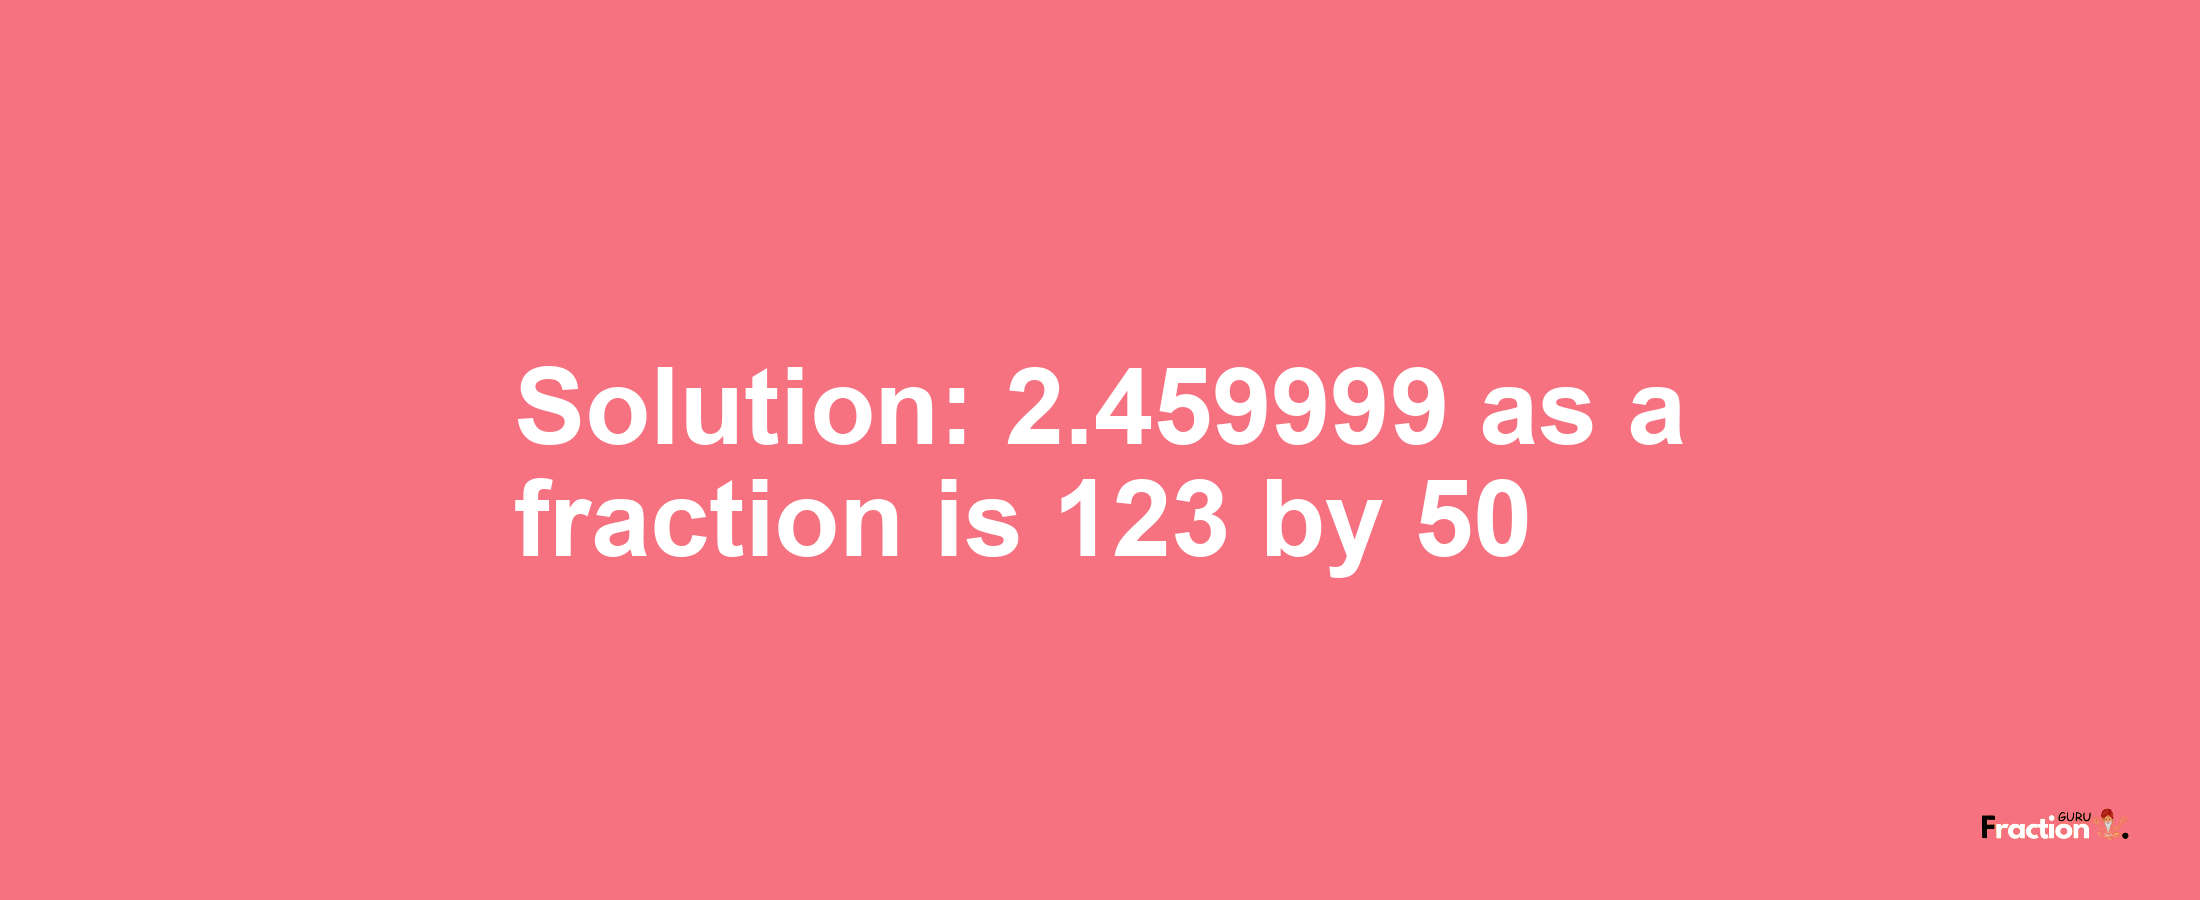 Solution:2.459999 as a fraction is 123/50